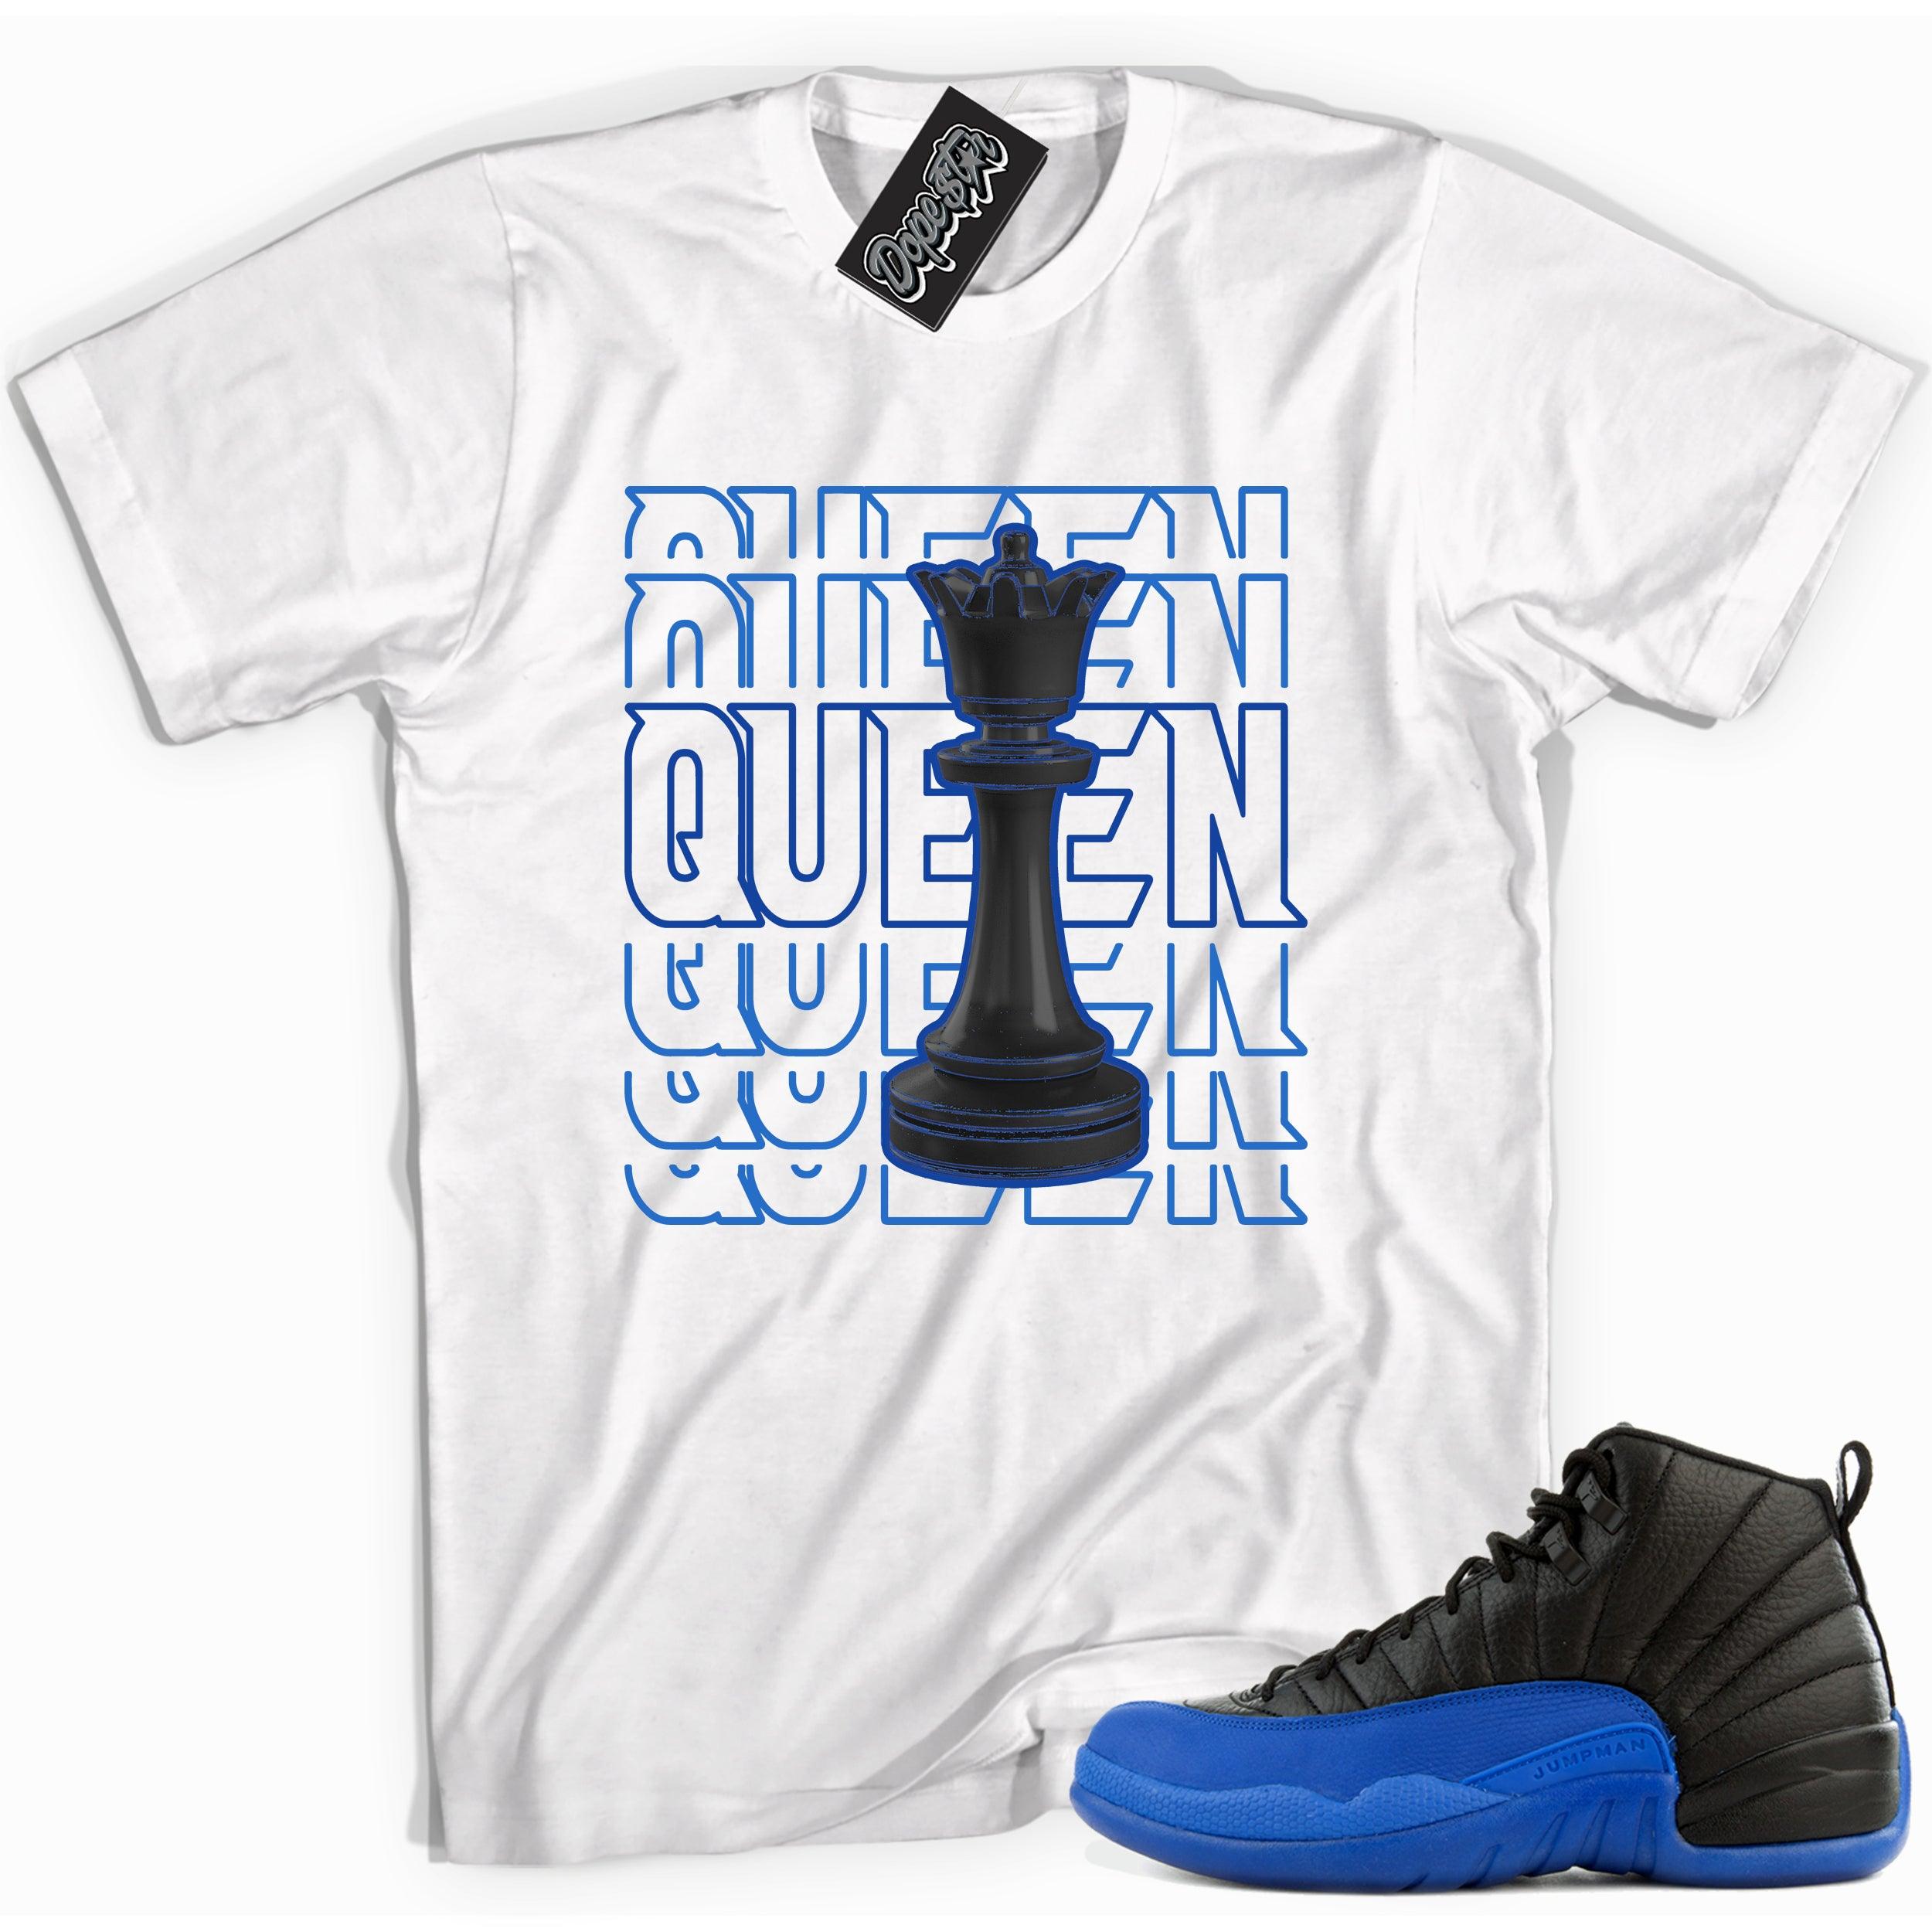 Cool white graphic tee with 'queen piece' print, that perfectly matches Air Jordan 12 Retro Black Game Royal sneakers.